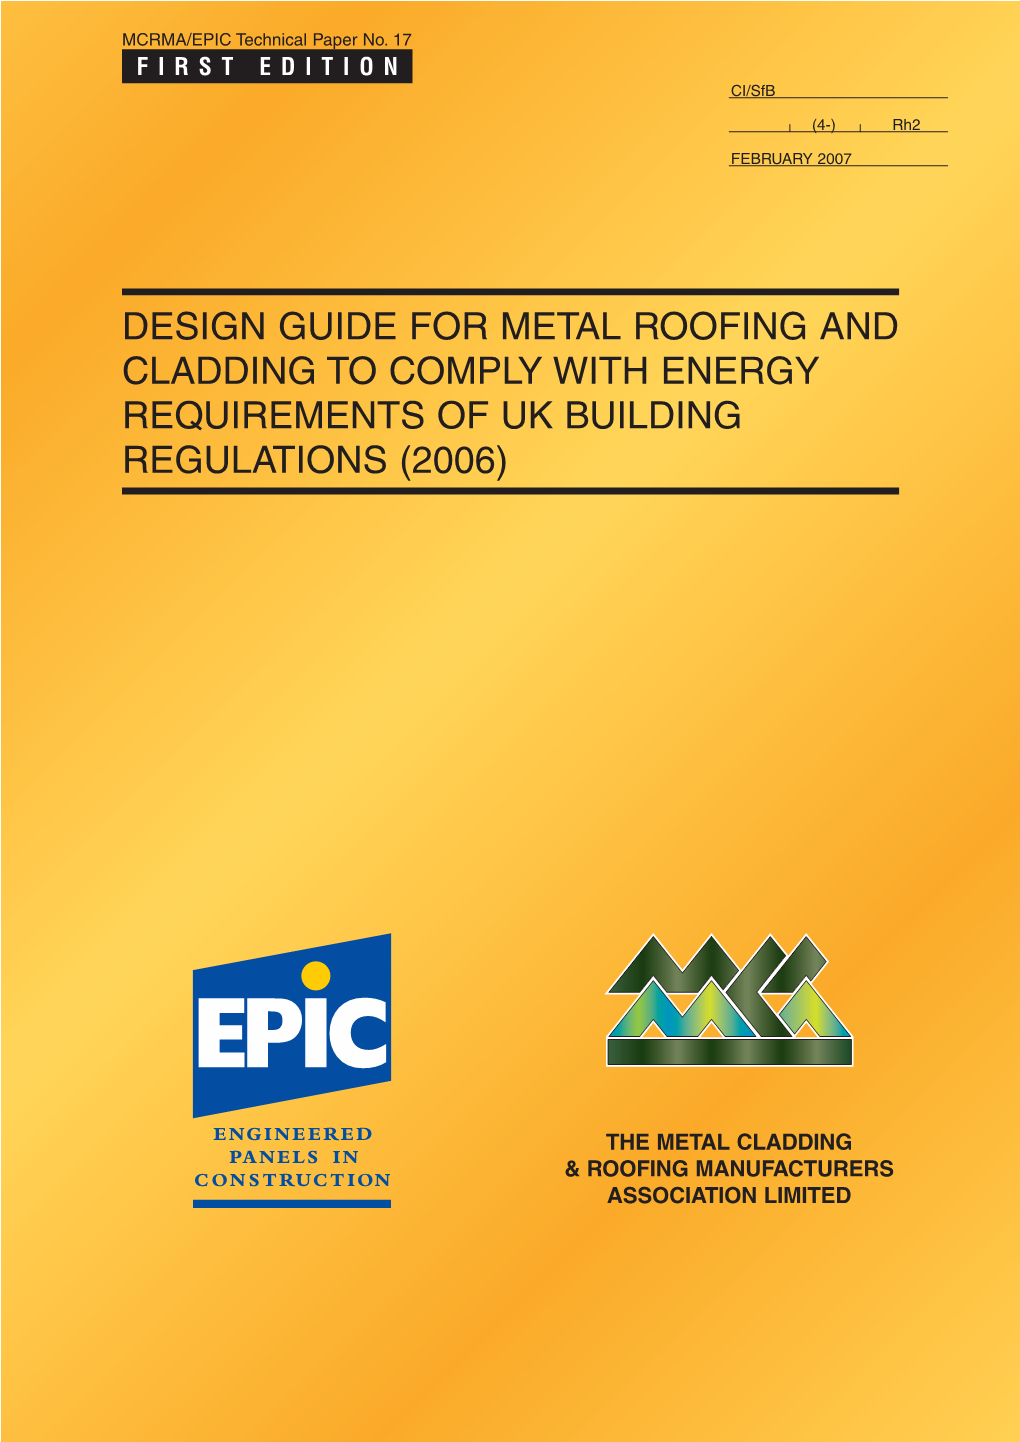 Design Guide for Metal Roofing and Cladding to Comply with Energy Requirements of Uk Building Regulations (2006)